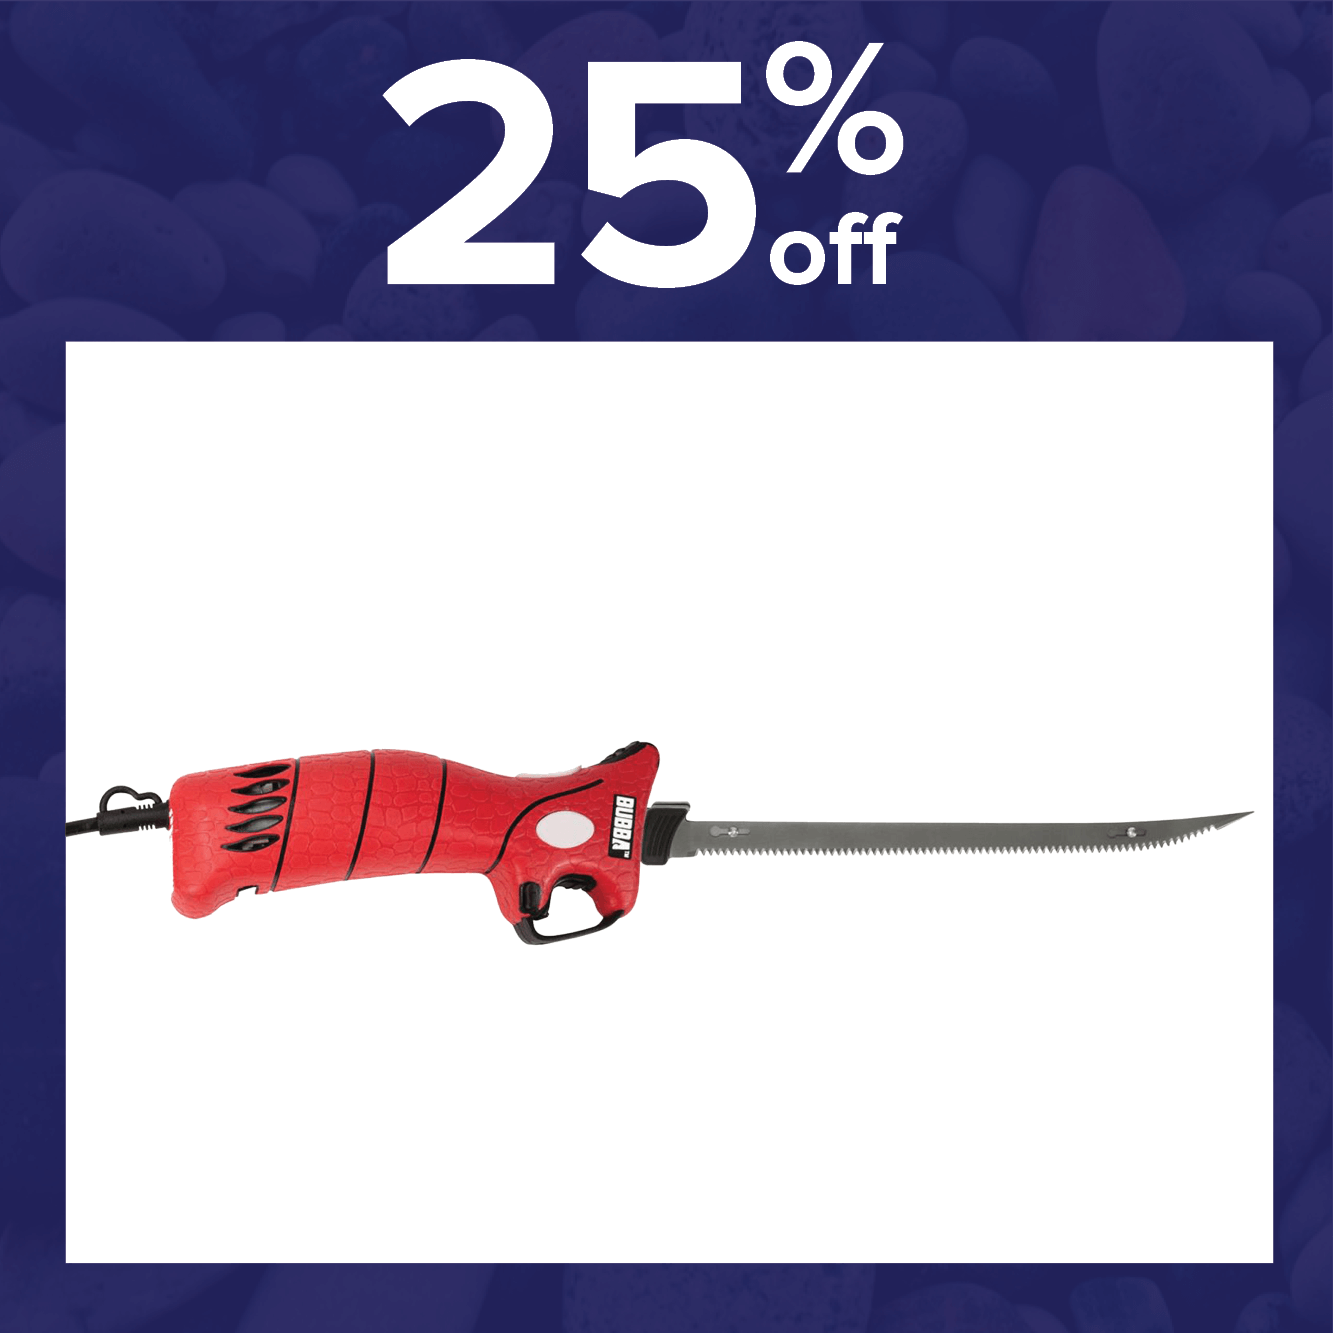 25% off the Bubba Blade 110V Corded Electric Fillet Knife